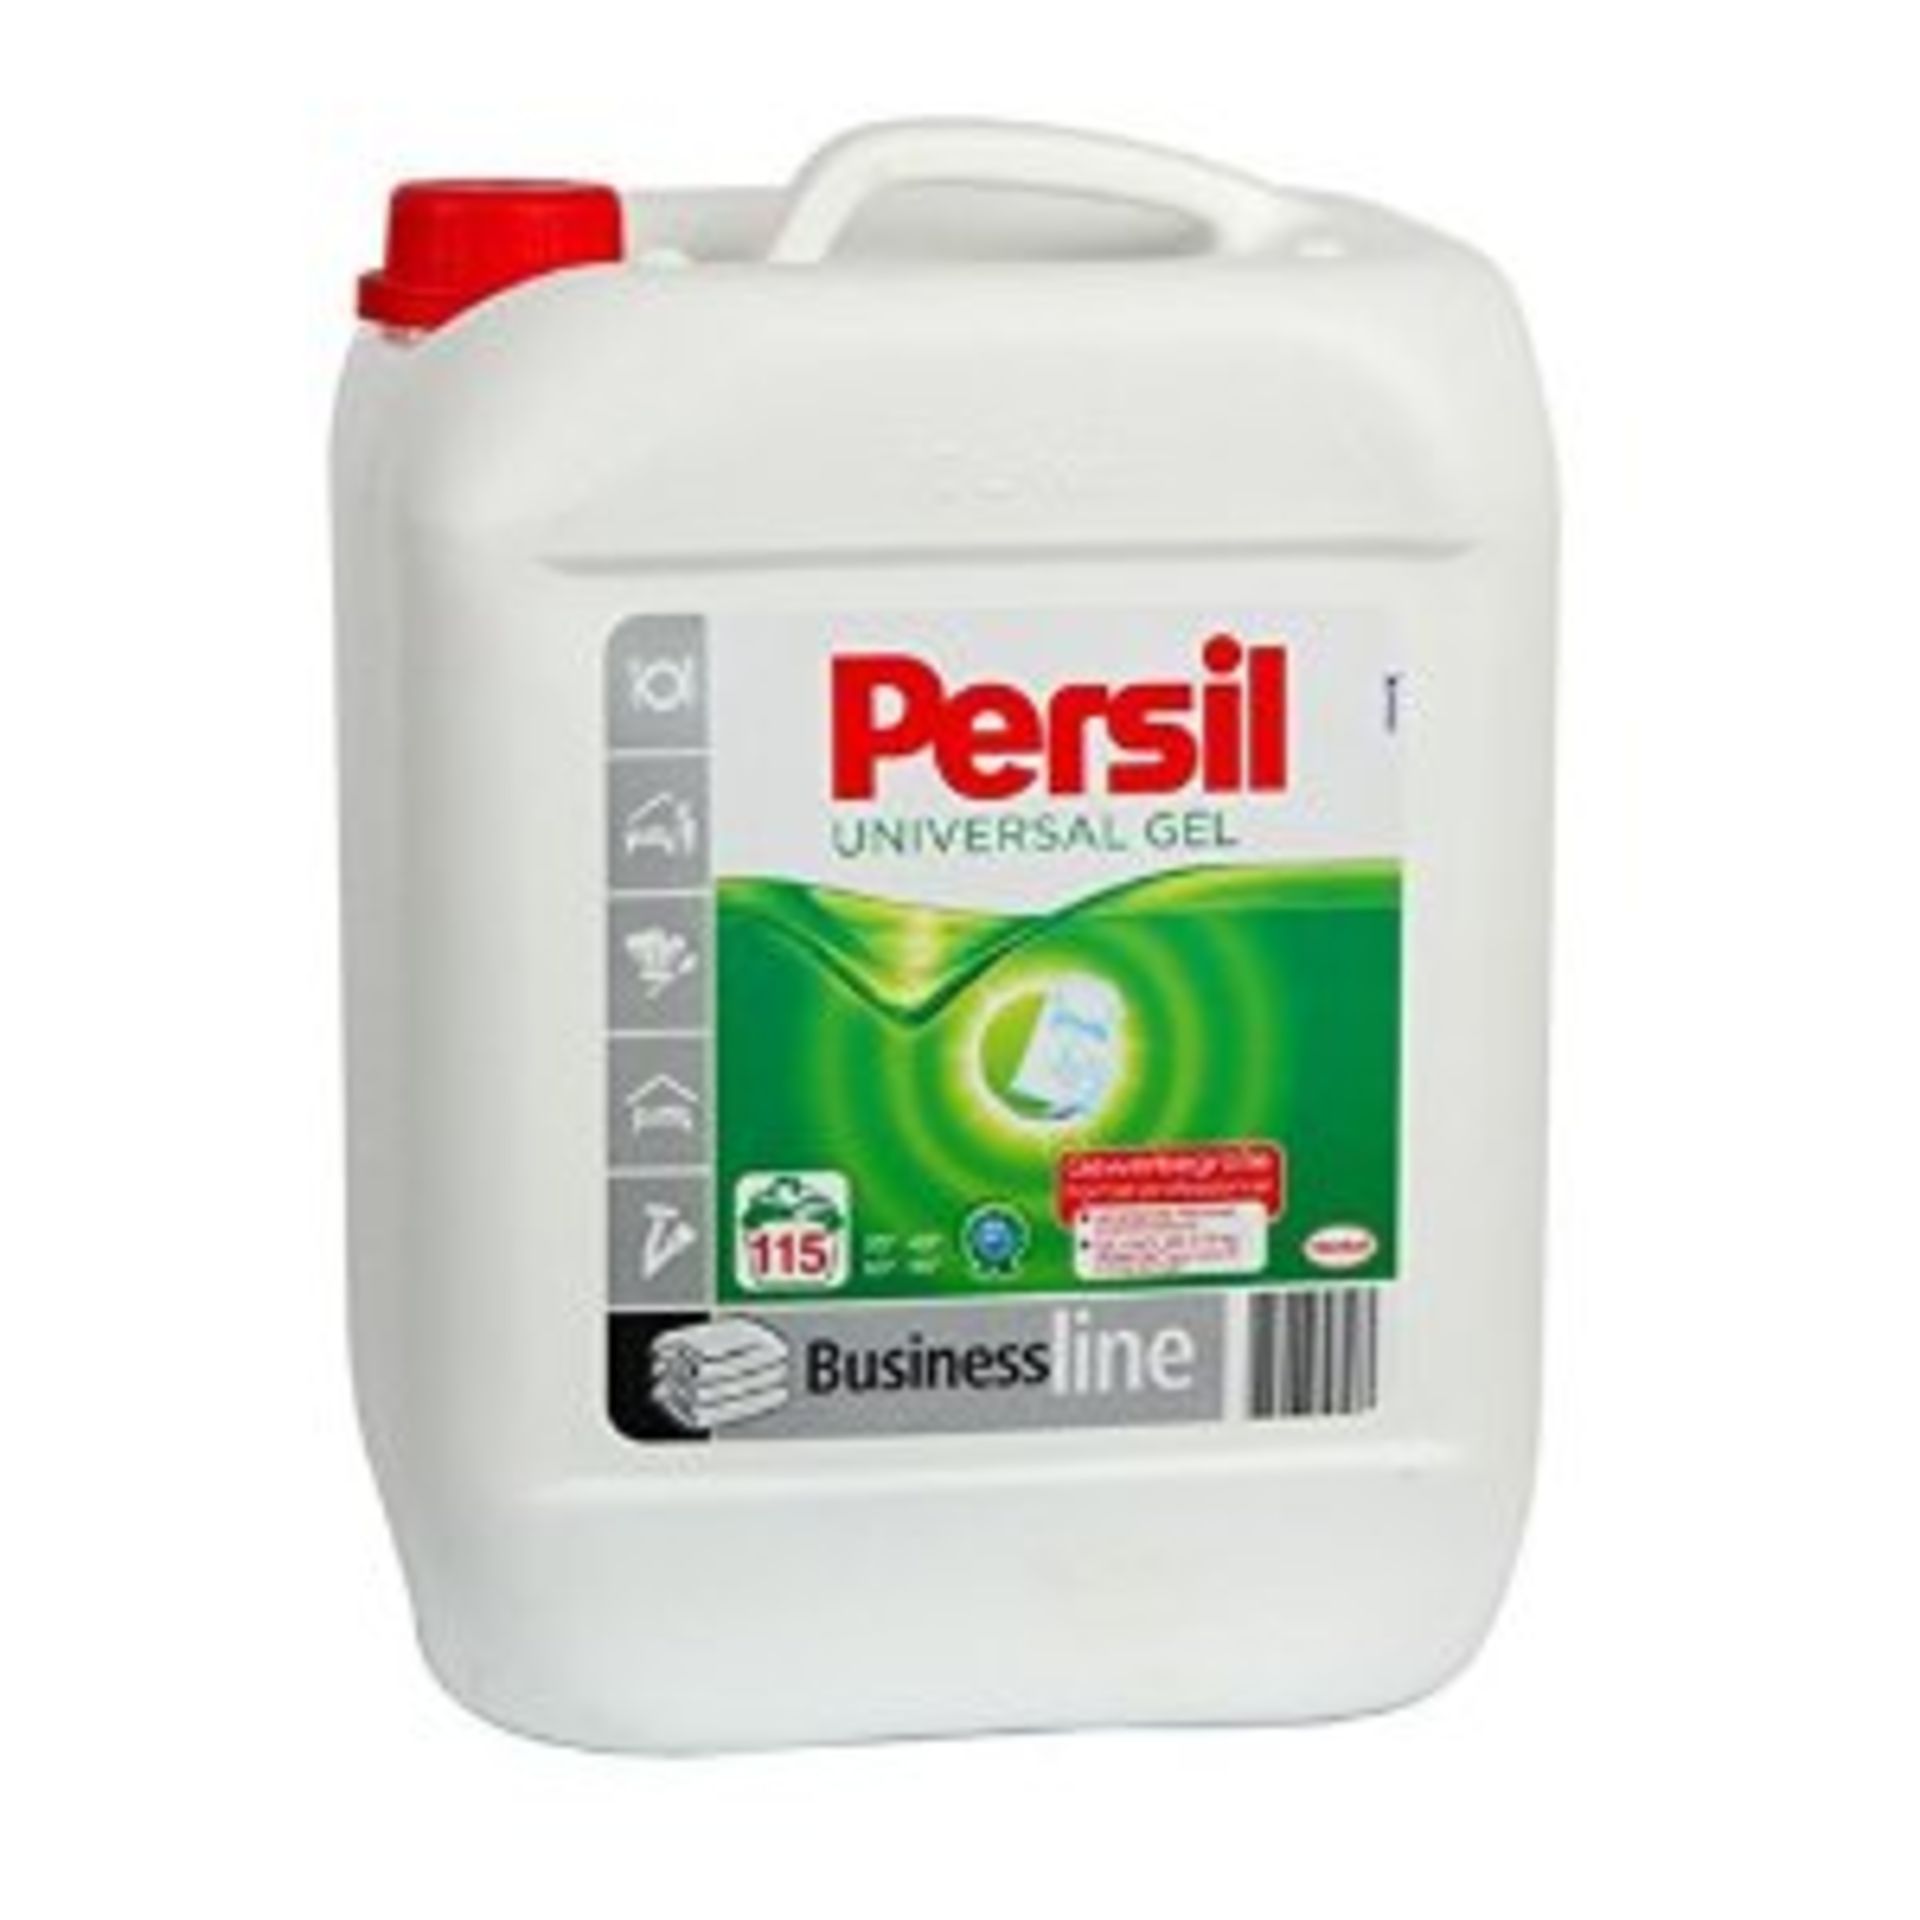 V Grade A Persil Universal Gel Business Line 8.395 Litres RRP £73 (Amz) X 10  Bid price to be